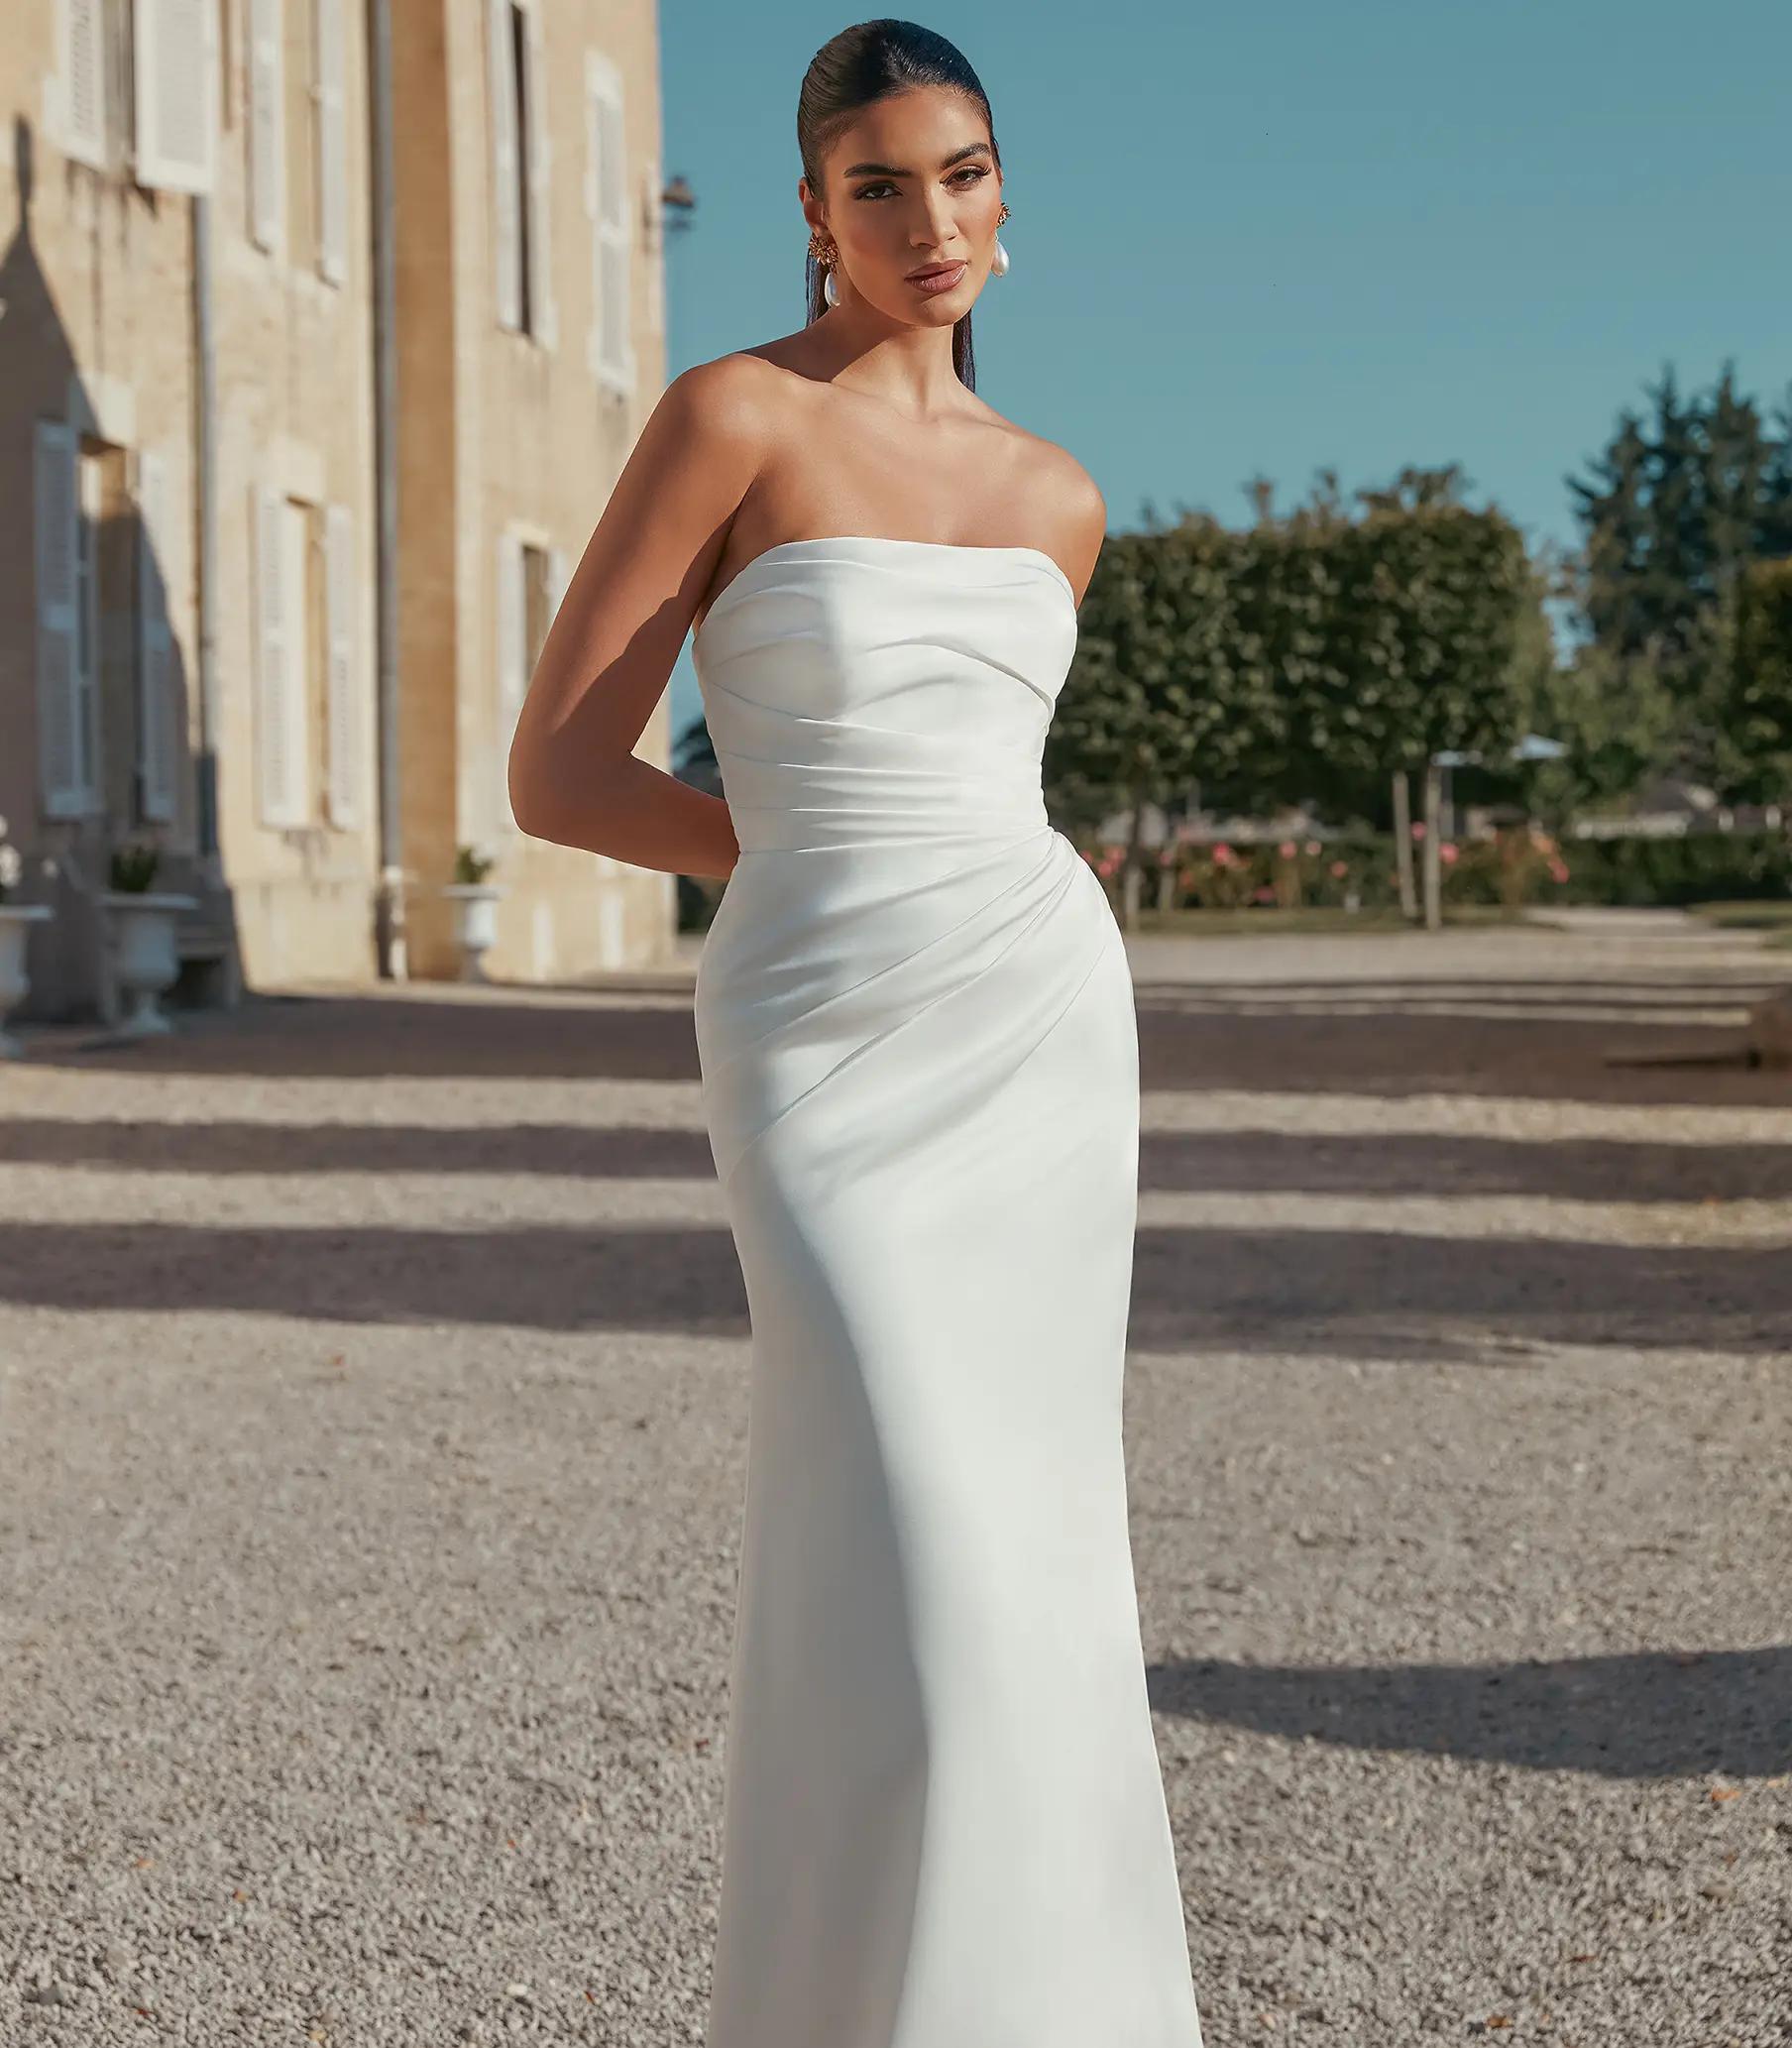 Model wearing a bridal gown